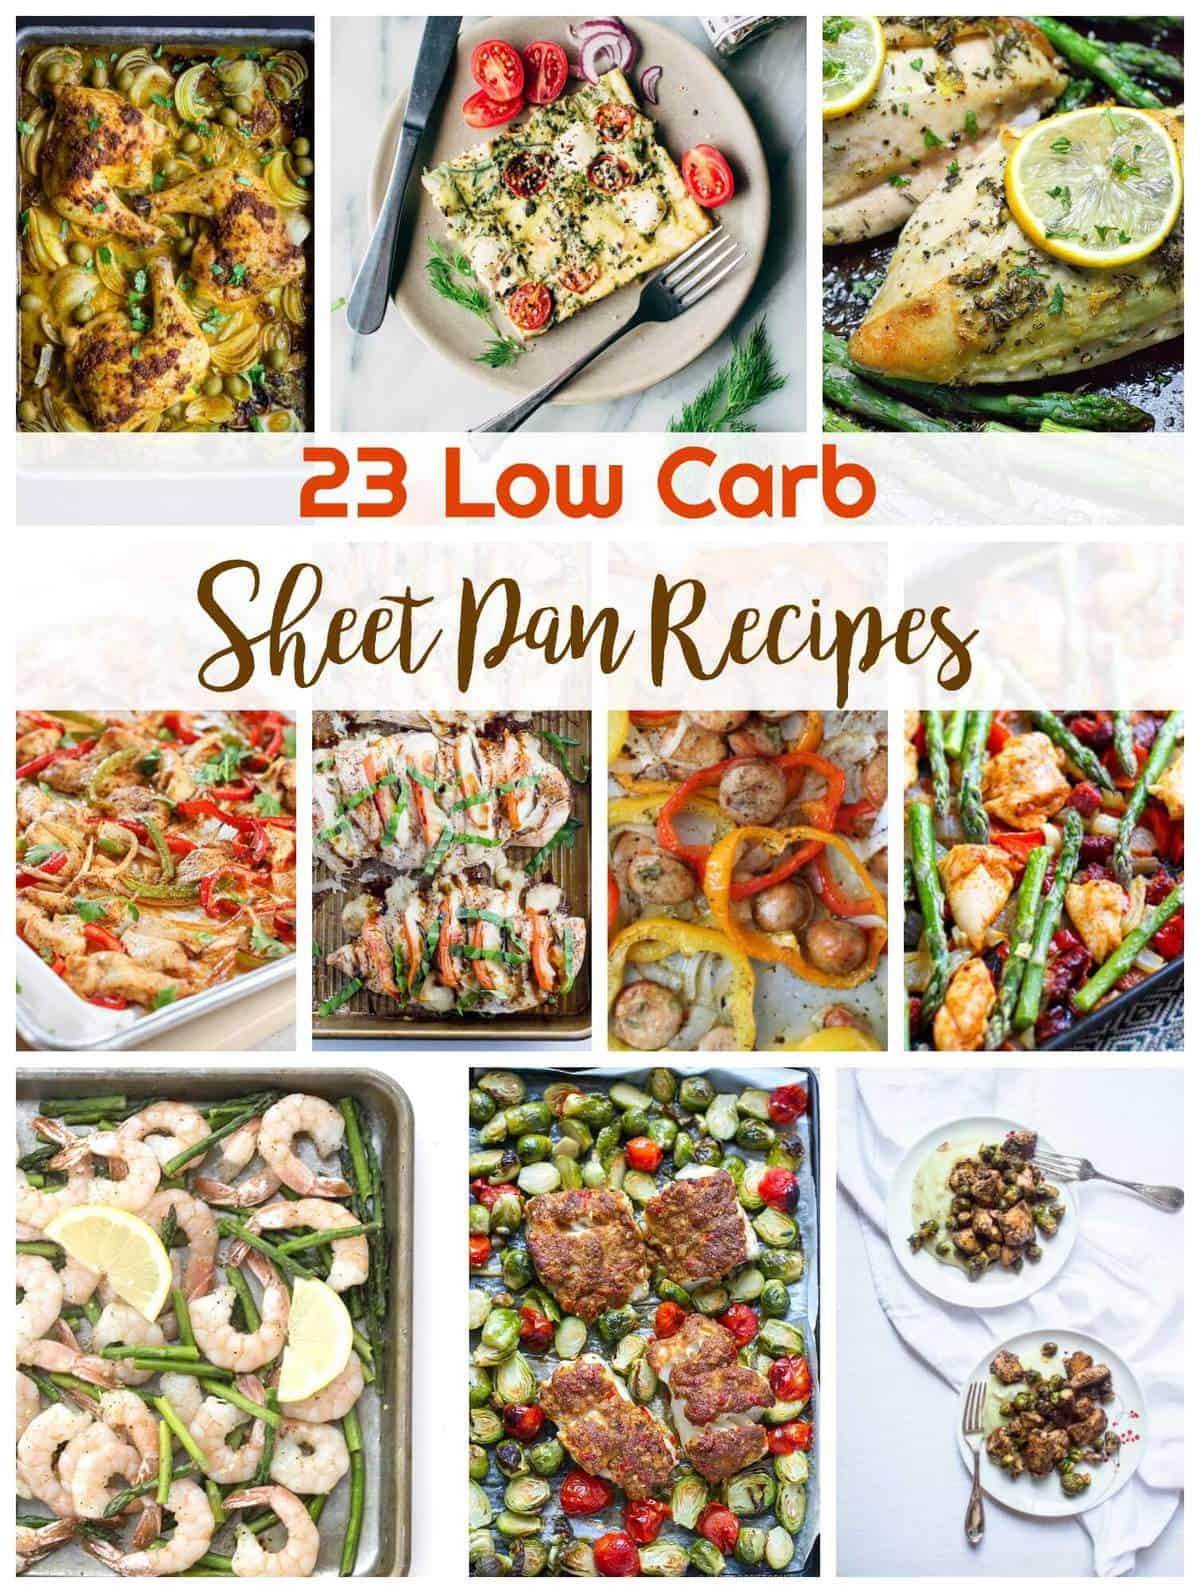 23 Low Carb Sheet Pan Recipes | Healthy Living In Body and Mind